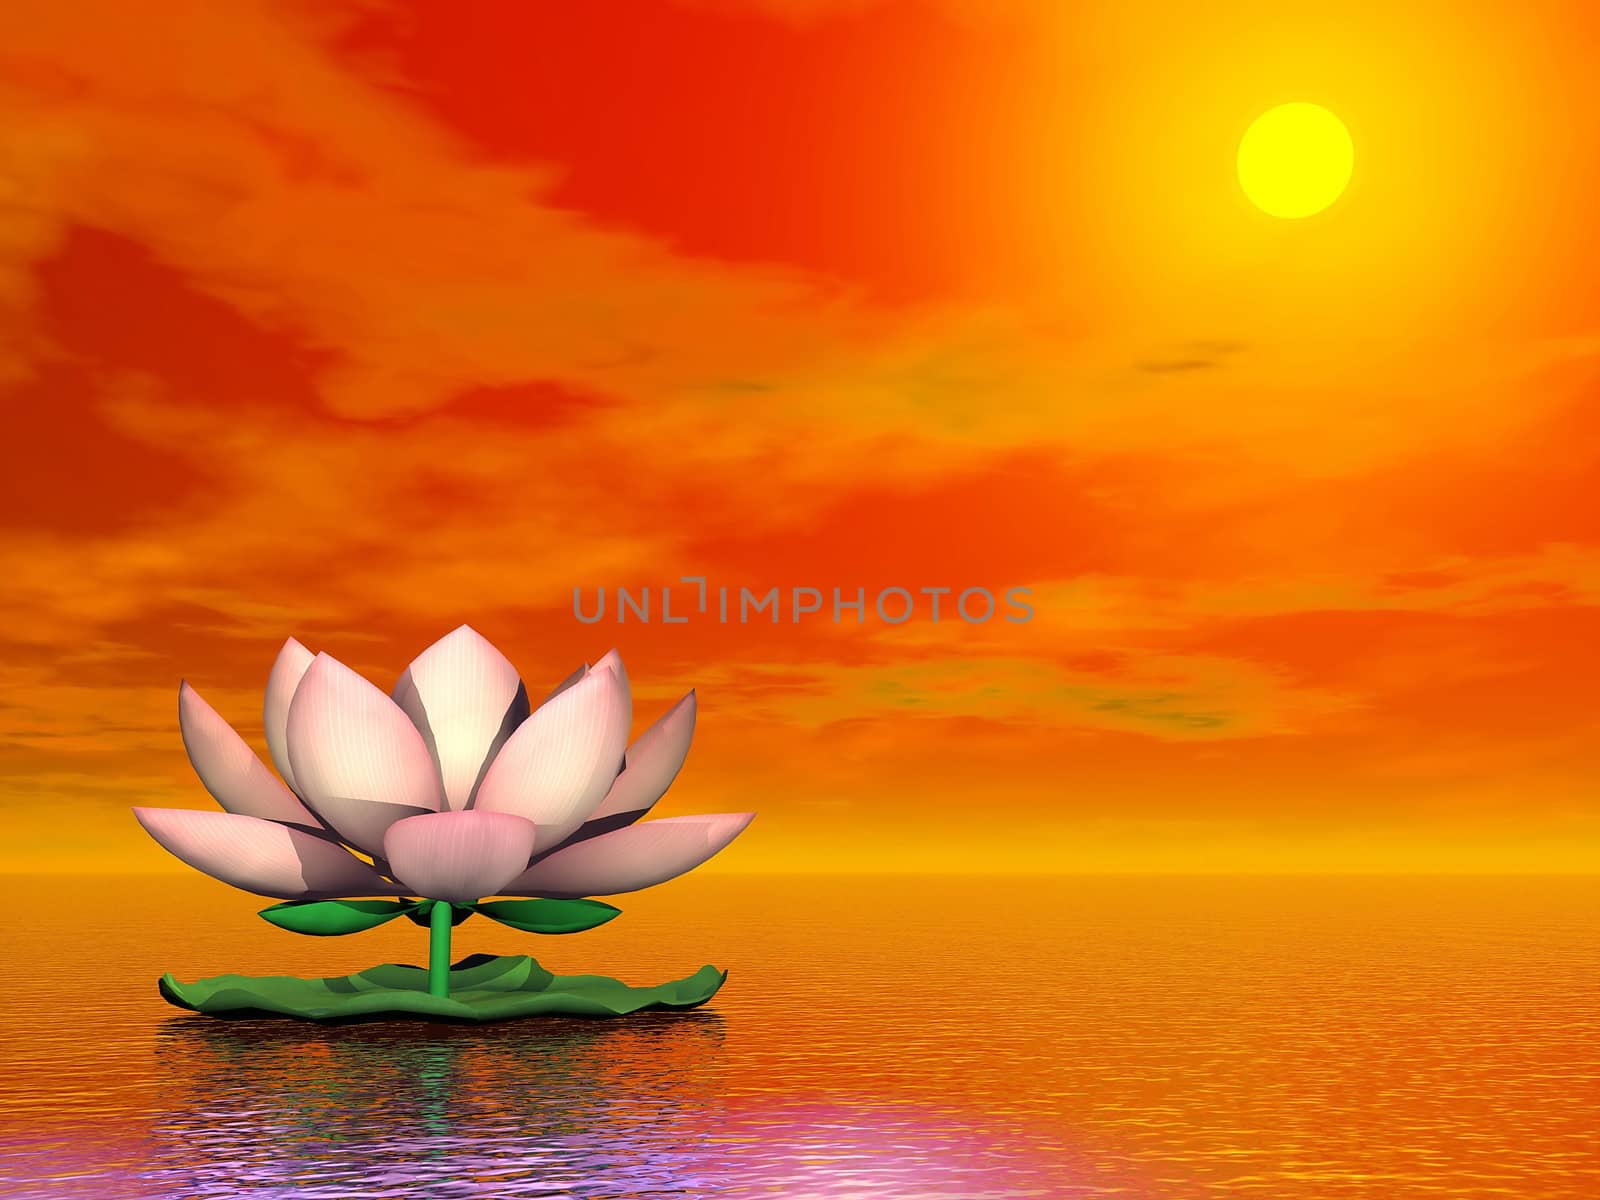 Beautiful pink lotus flower on the water by red sunset